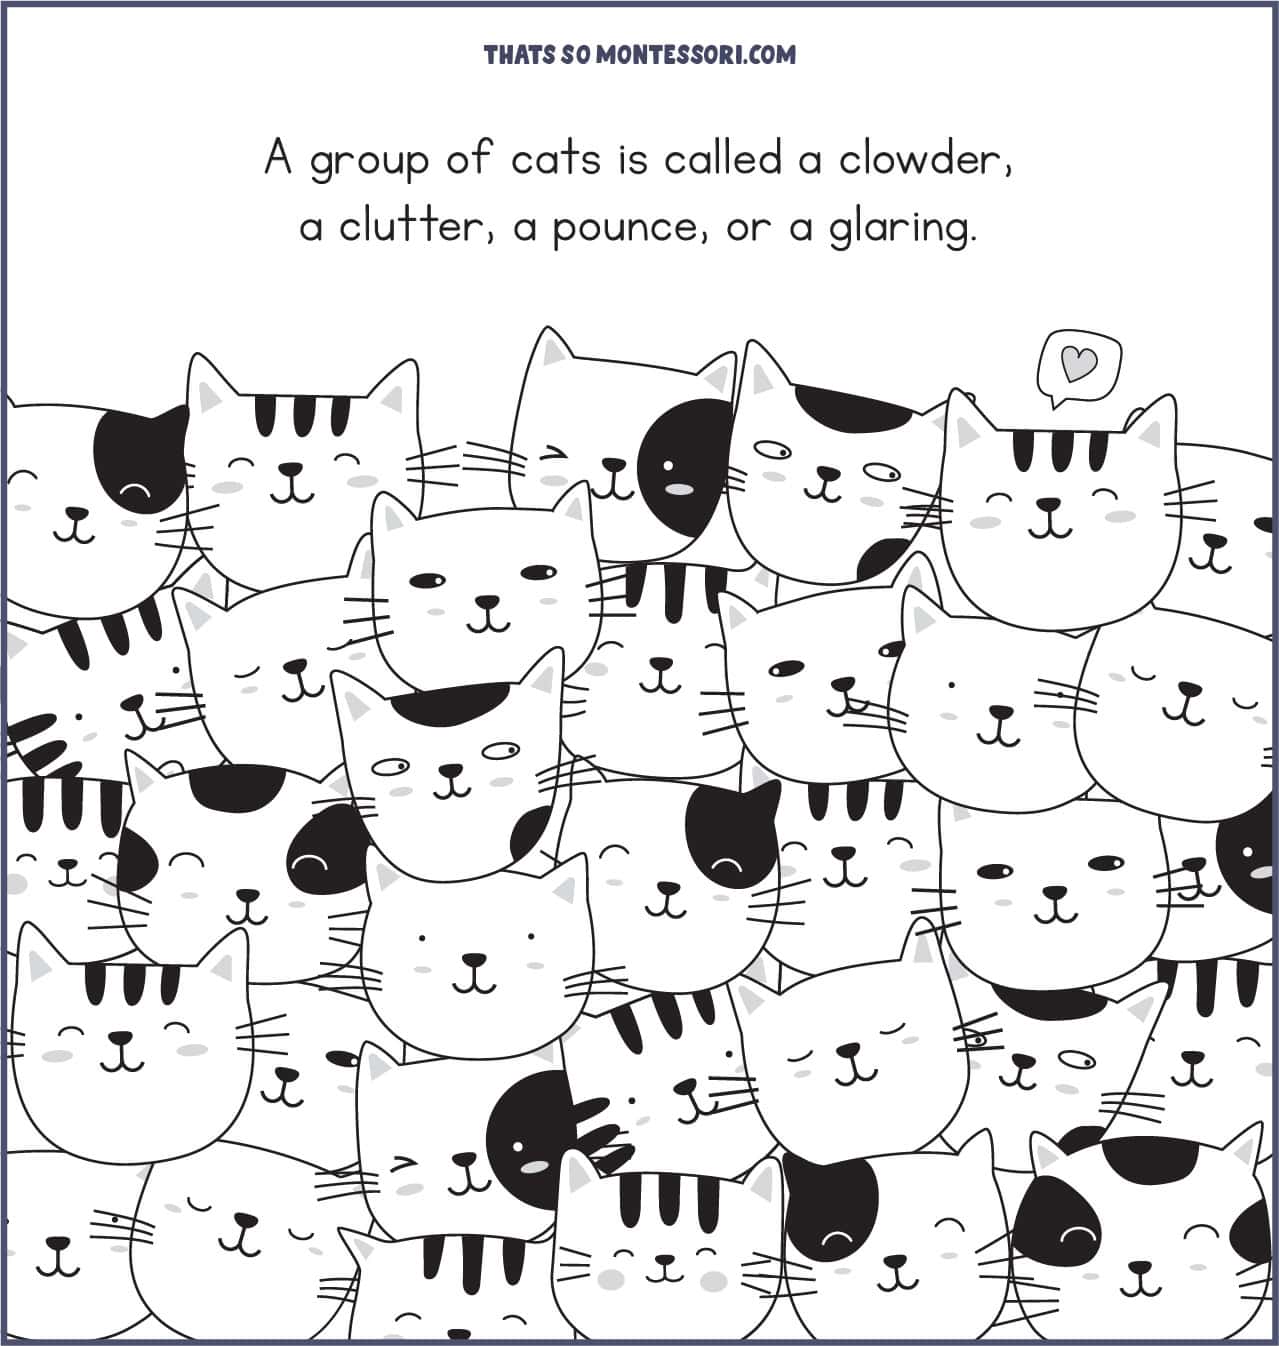 A cat fact explaining that a group of cats is called a clowder. The page is filled with adorably illustrated cat heads.